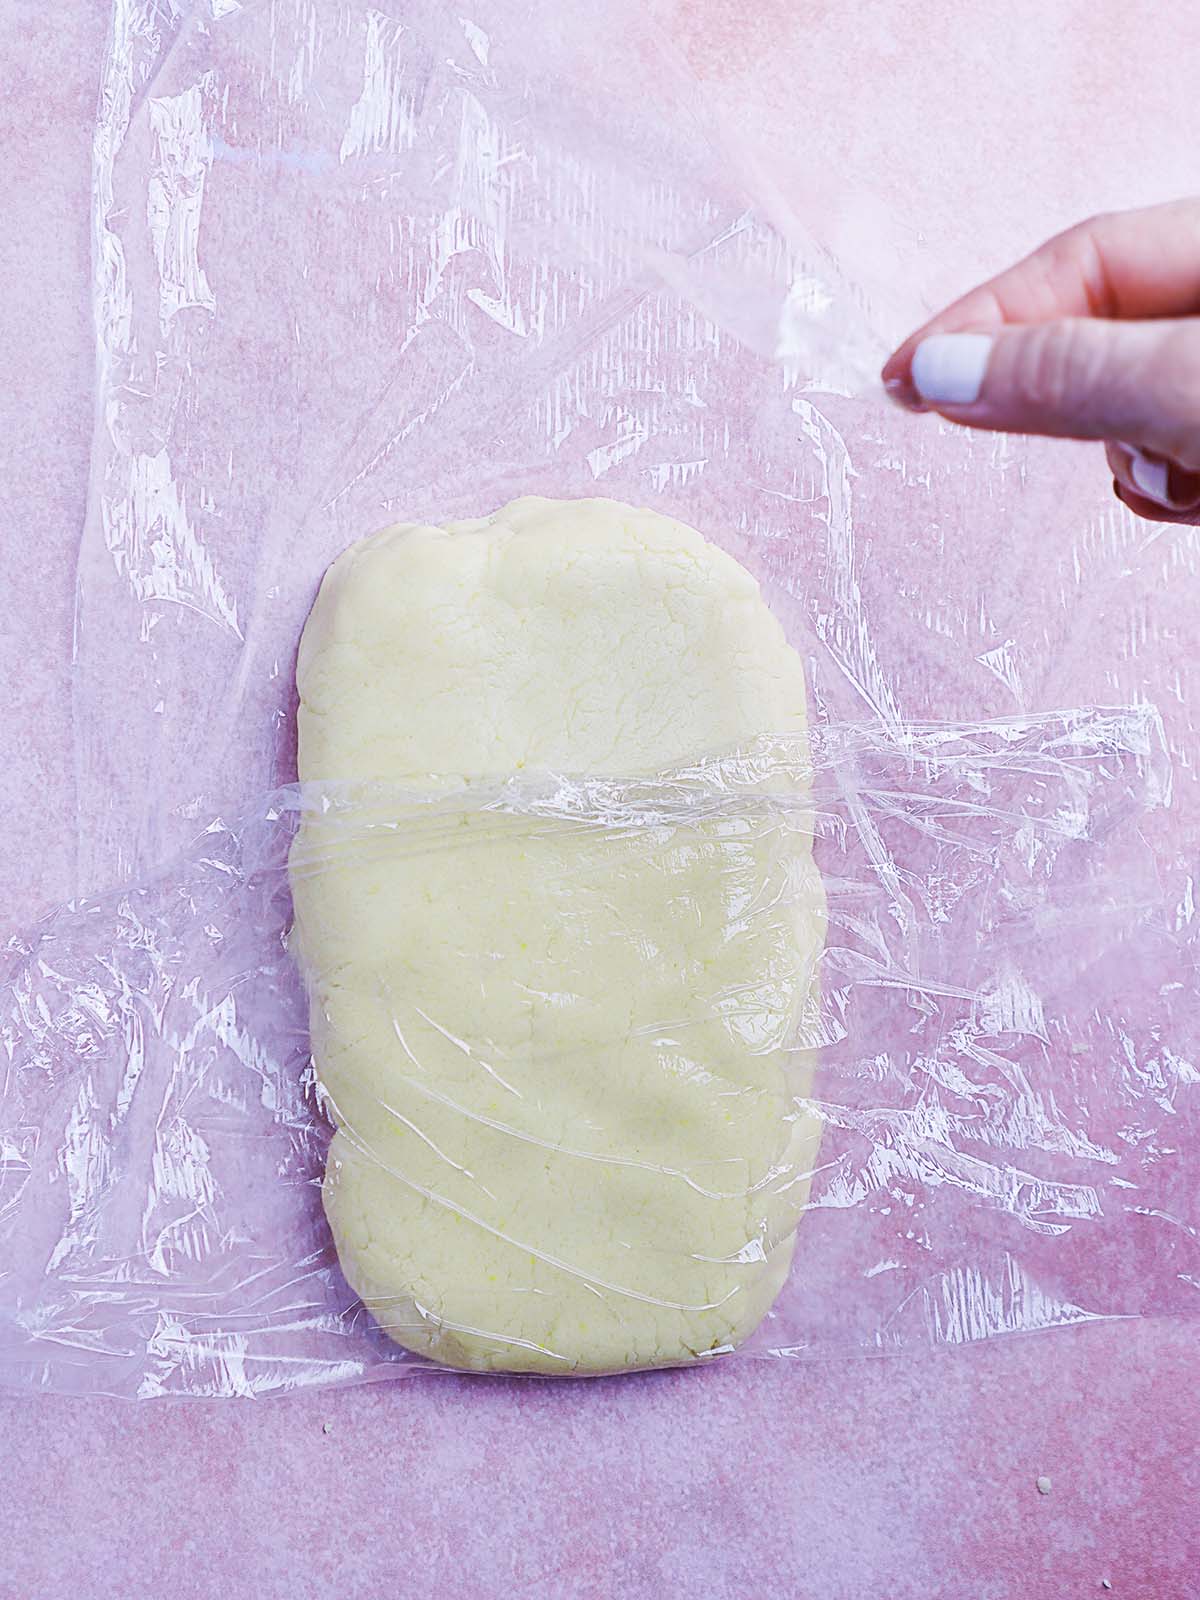 A hand placing plastic wrap over cookie dough in the shape of a rectangle.